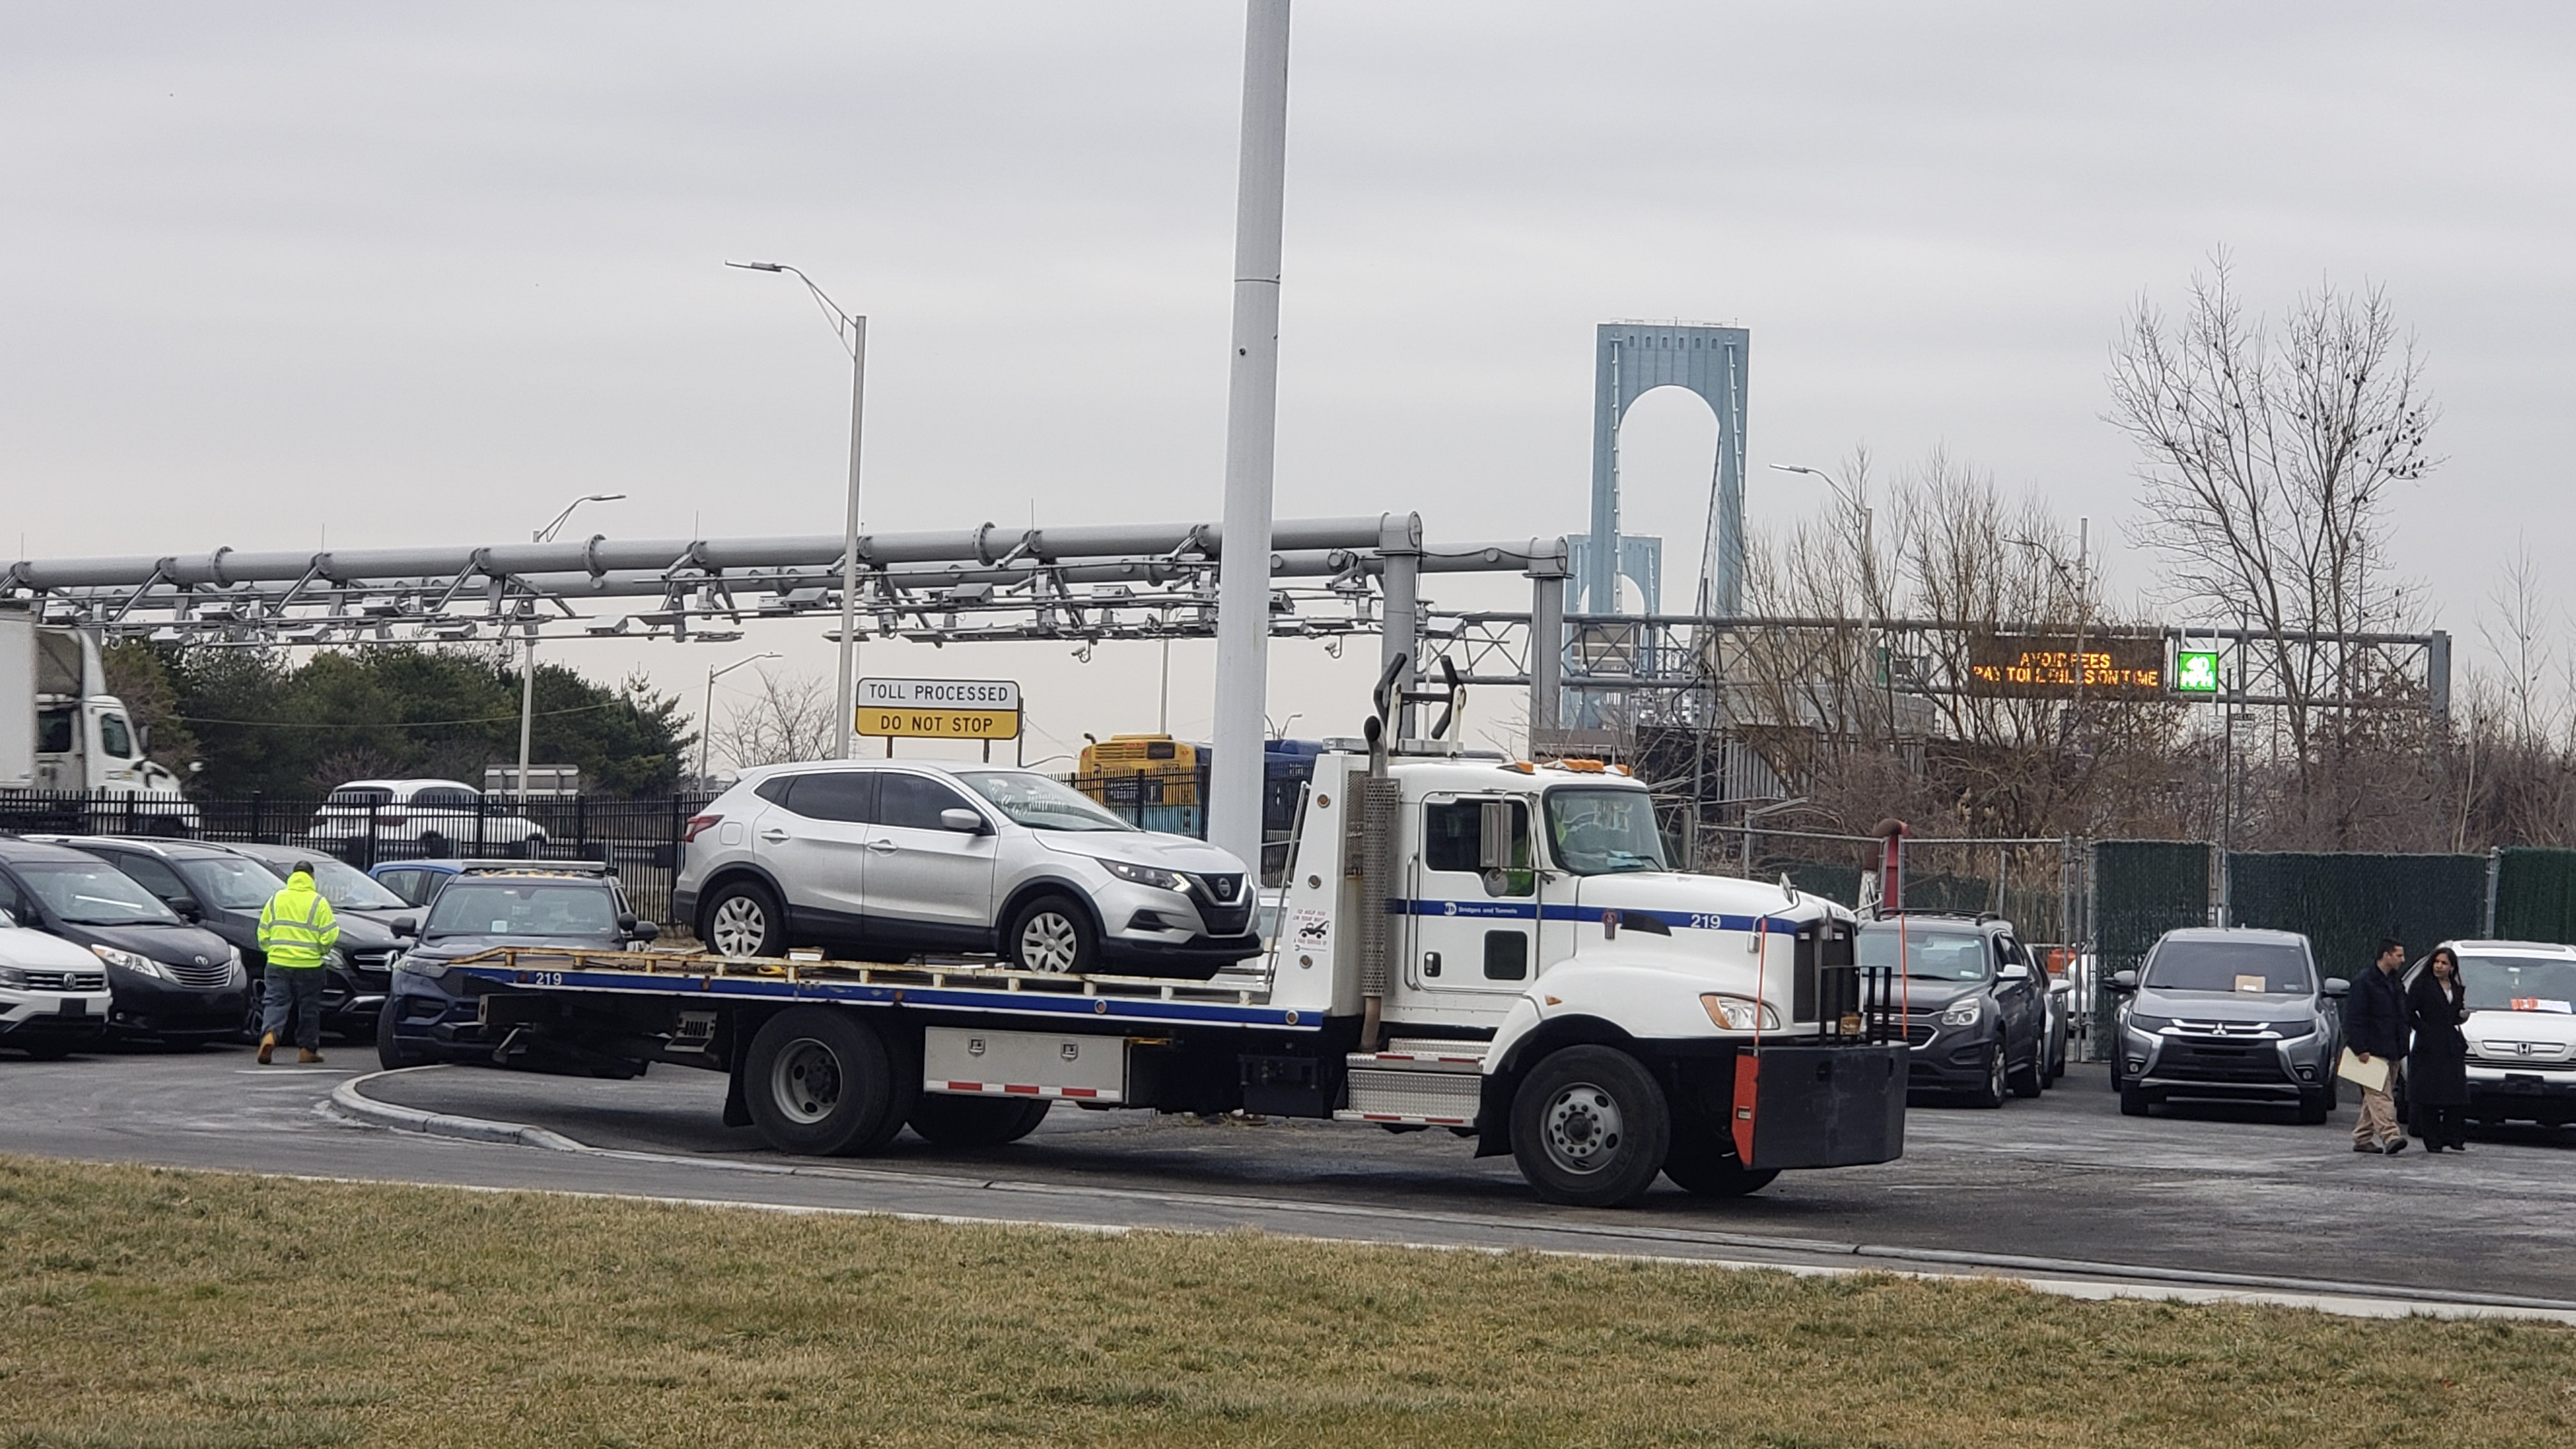 MTA Bridge and Tunnel Officers Interdict 32 Vehicles Belonging to Persistent Toll Violators Who Owed Nearly $900,000 in Unpaid Tolls and Fees